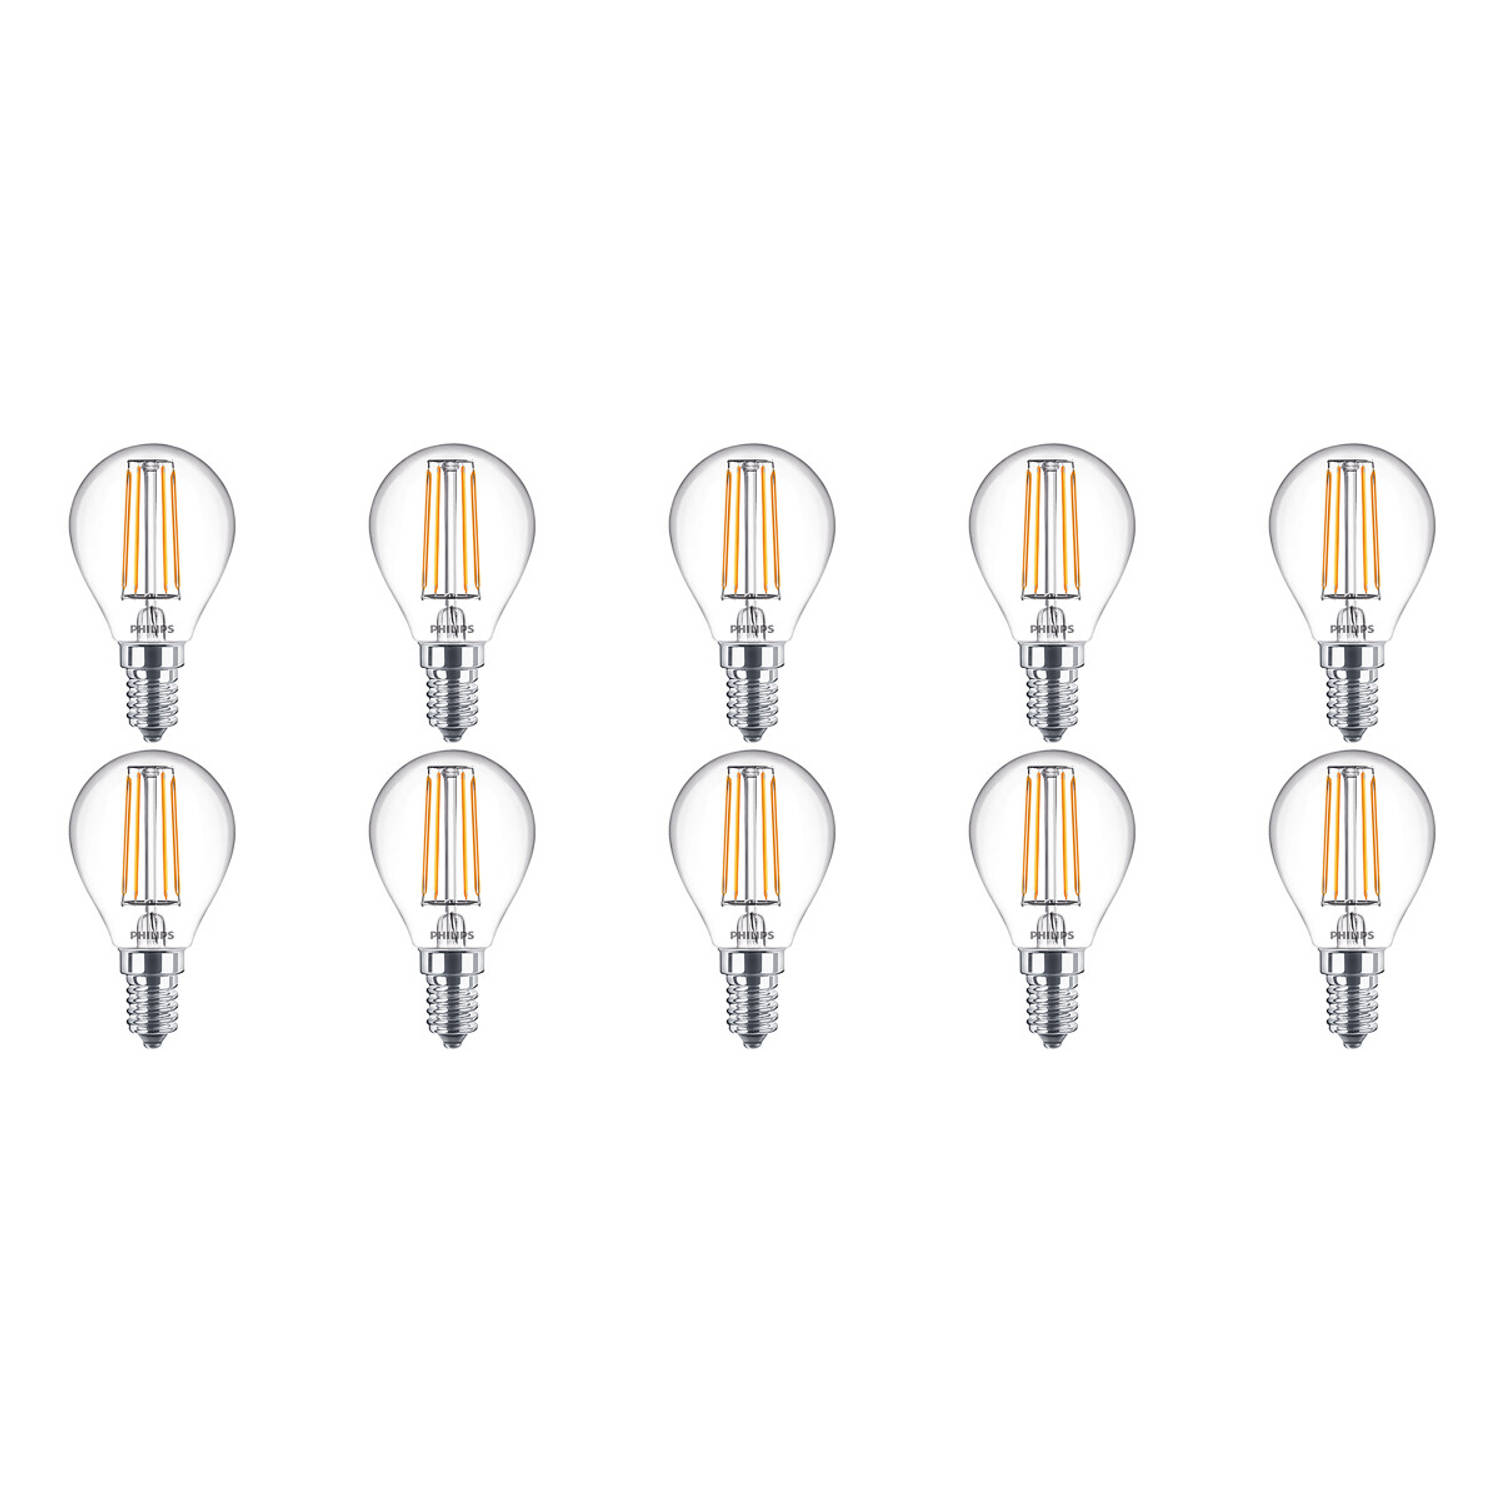 maximaal blouse duif PHILIPS - LED Lamp 10 Pack - CorePro Luster 827 P45 CL - E14 Fitting - 4.5W  - Warm Wit 2700K Vervangt 40W | Blokker